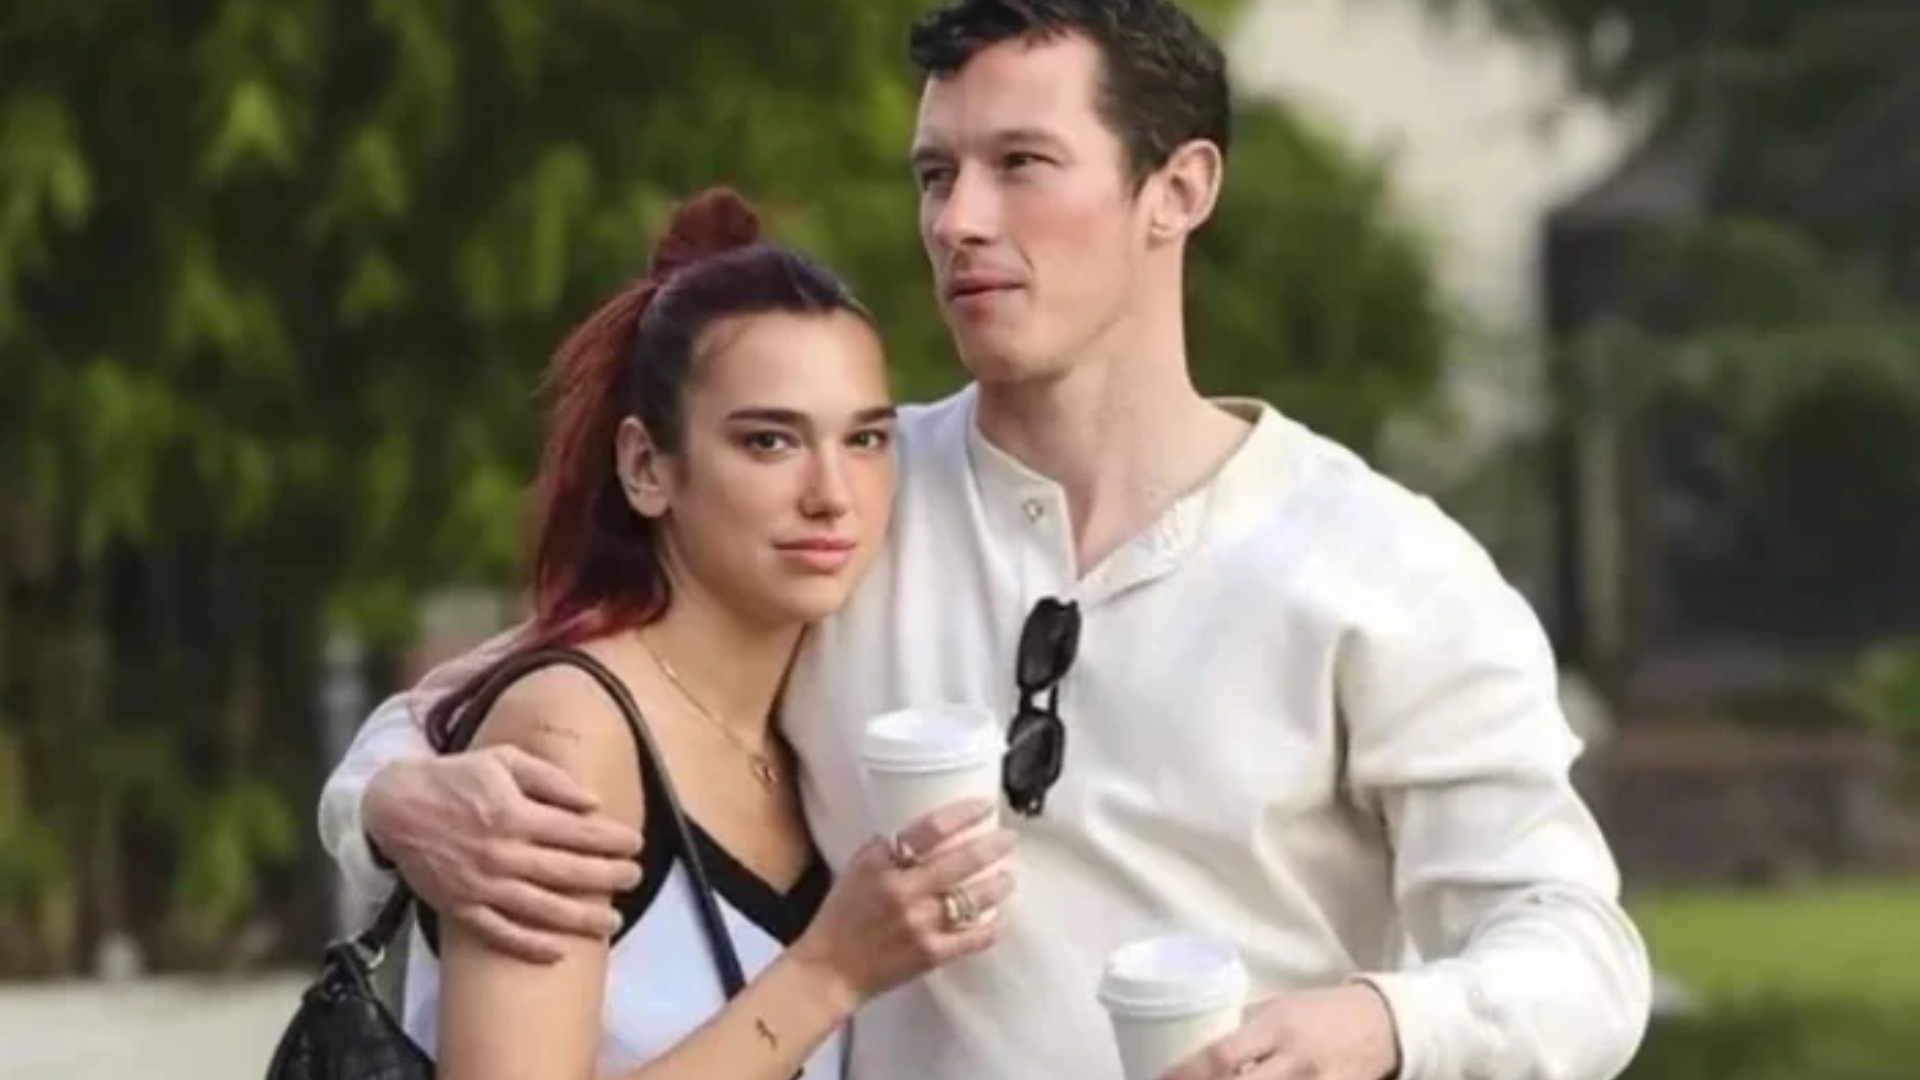 Dua Lipa and Callum Turner kicked of dating speculations earlier this year